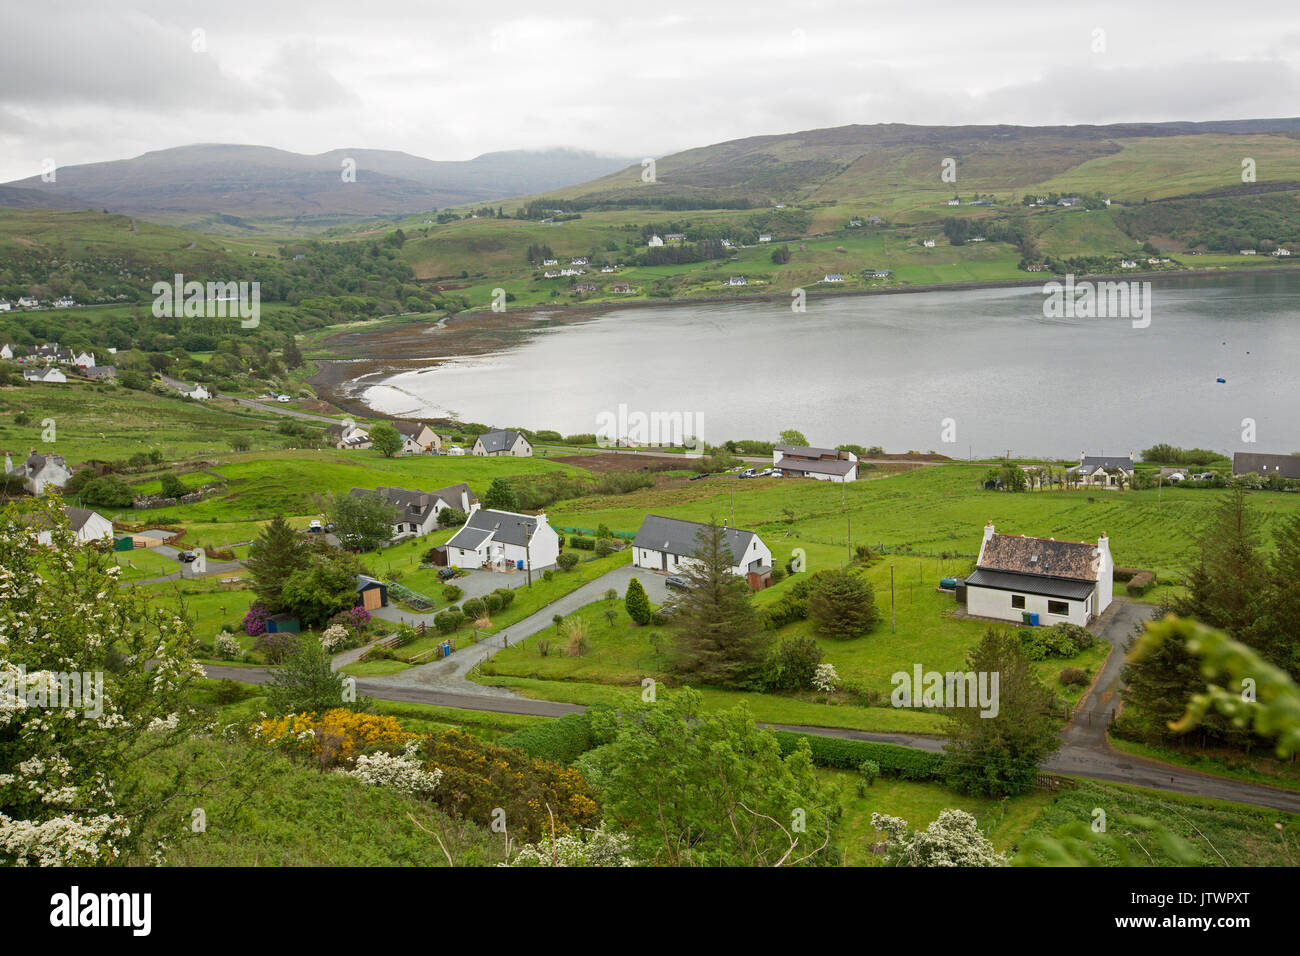 Vast view, from high lookout, of town and harbour surrounded by hills and mountains at Uig, Isle of Skye, Scotland Stock Photo